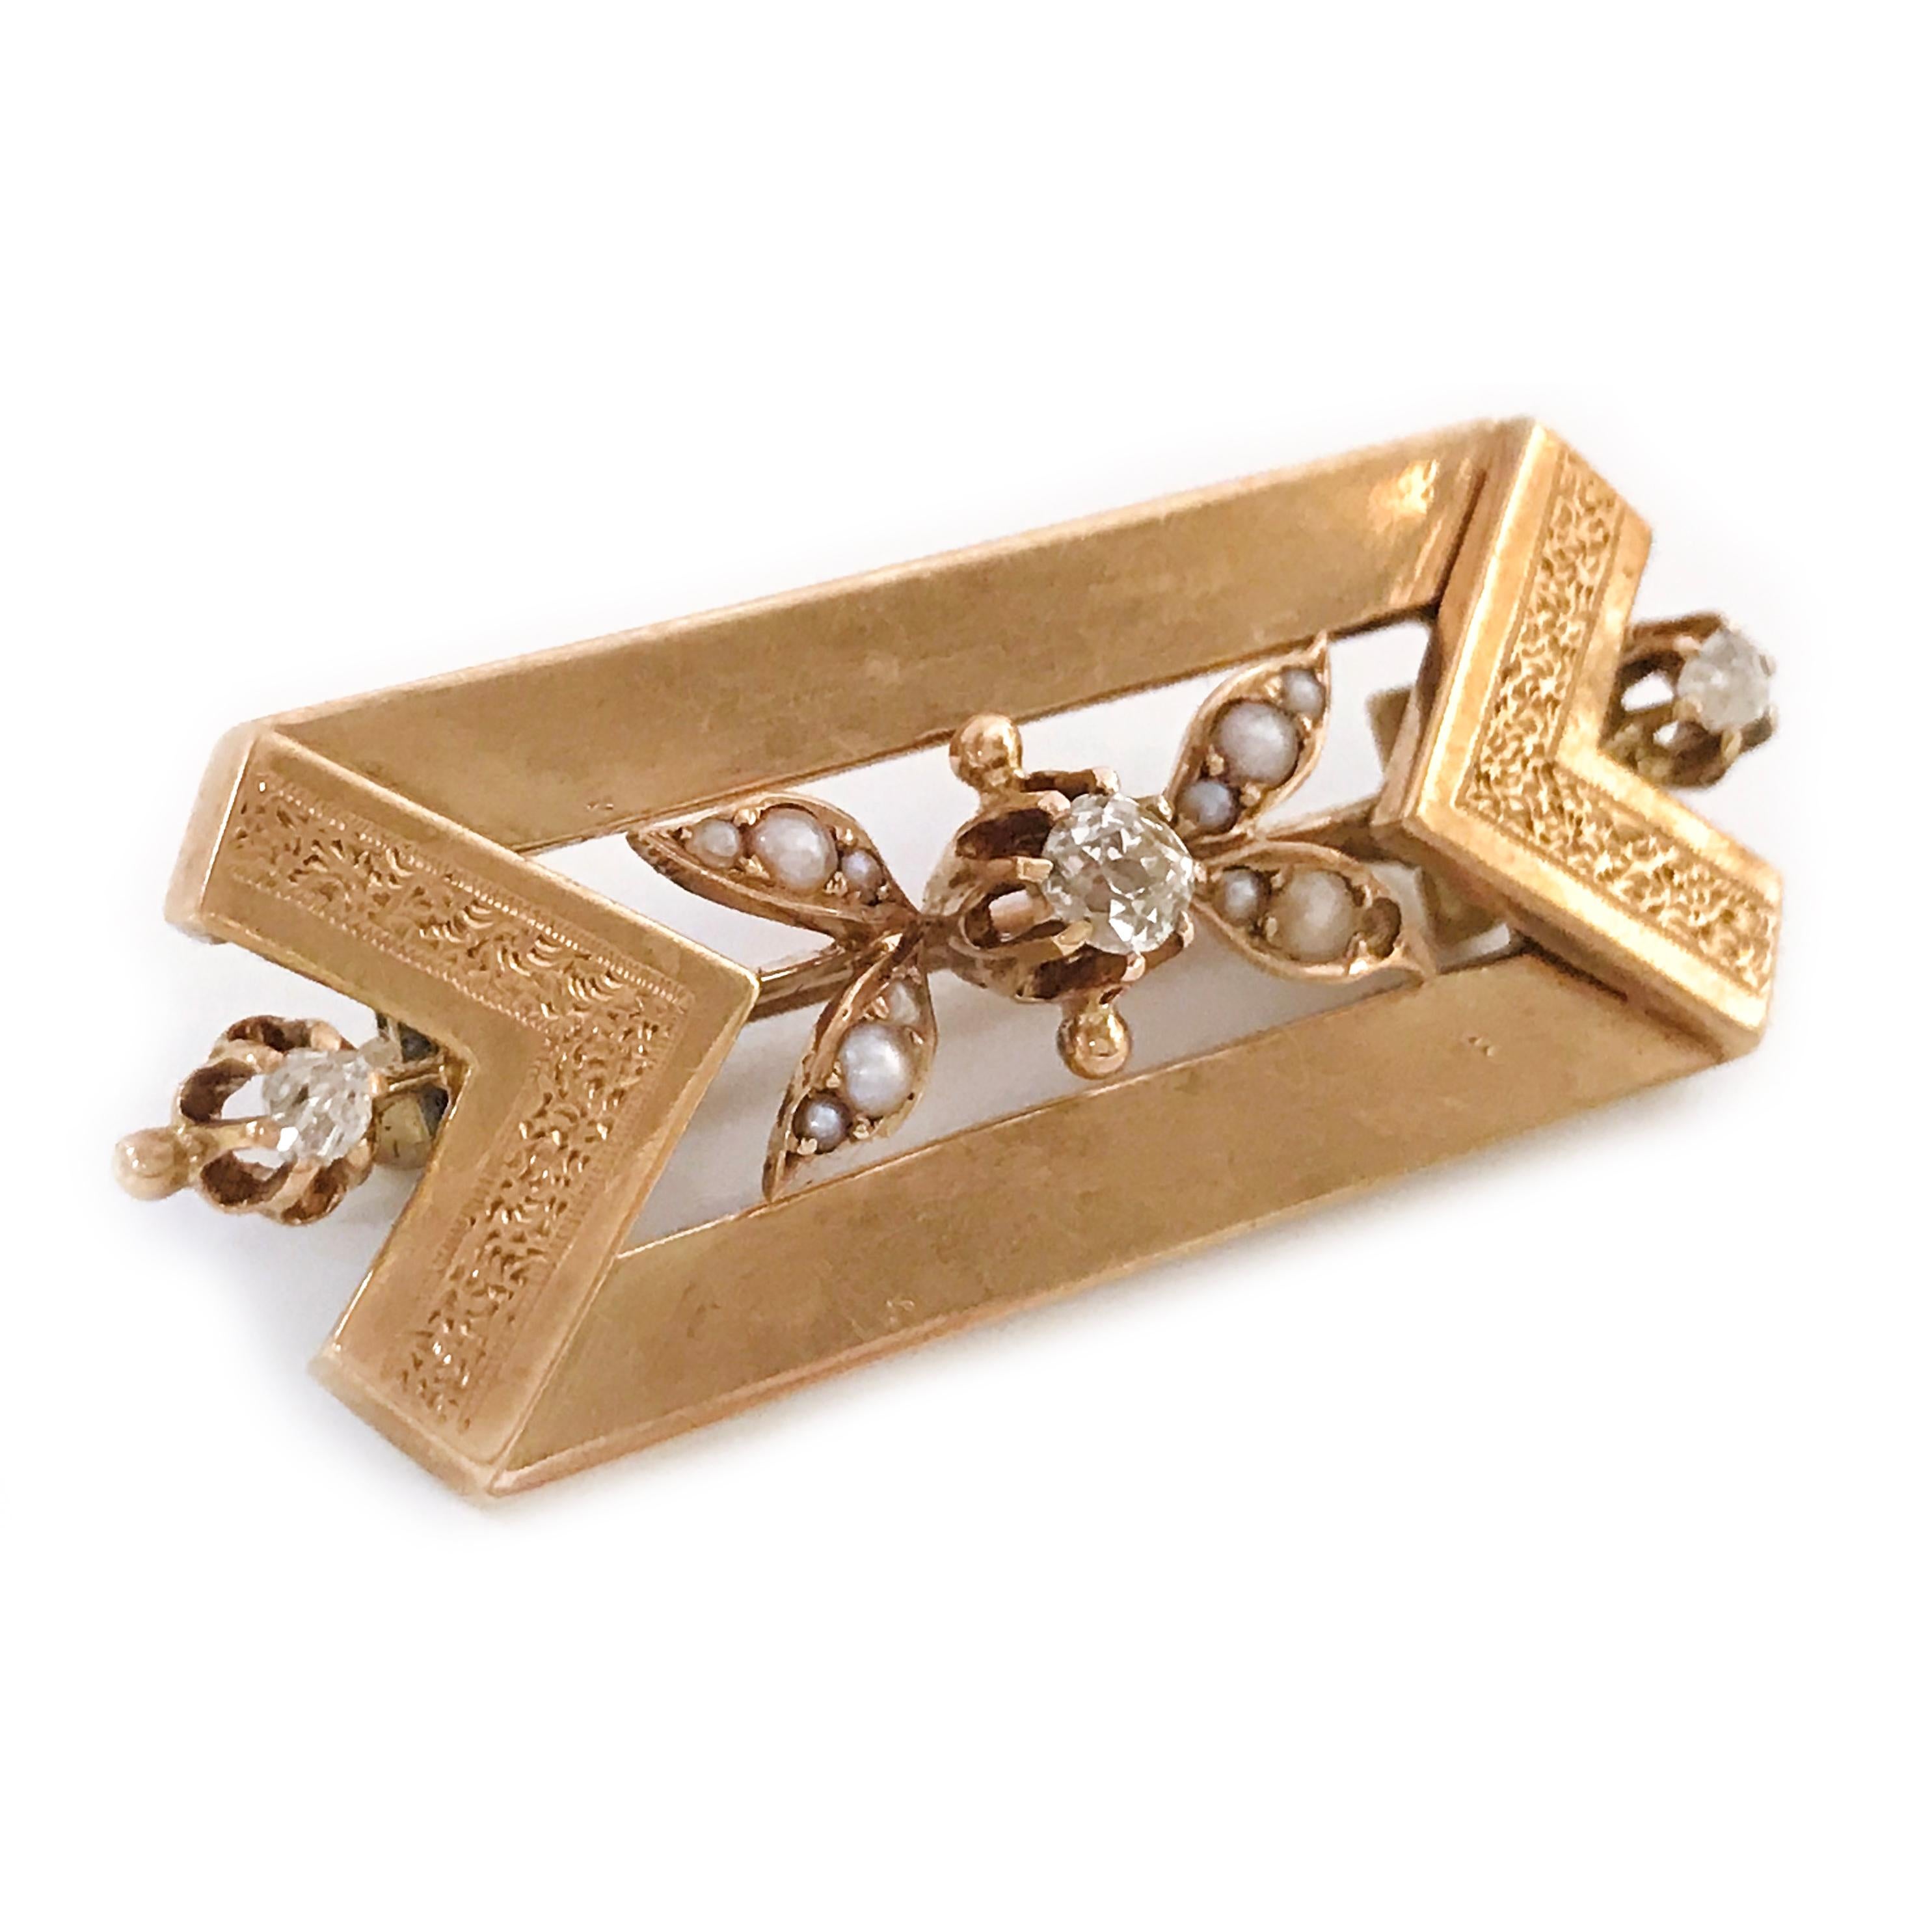 Victorian 14 Karat Rose Gold Diamond Seed Pearl Brooch. Simple and delicate yet sophisticated brooch/pin. Three Rose-cut diamonds are set in a buttercup setting. The diamonds are I1 in clarity (G.I.A.) and H-I in color (G.I.A.). The brooch has three